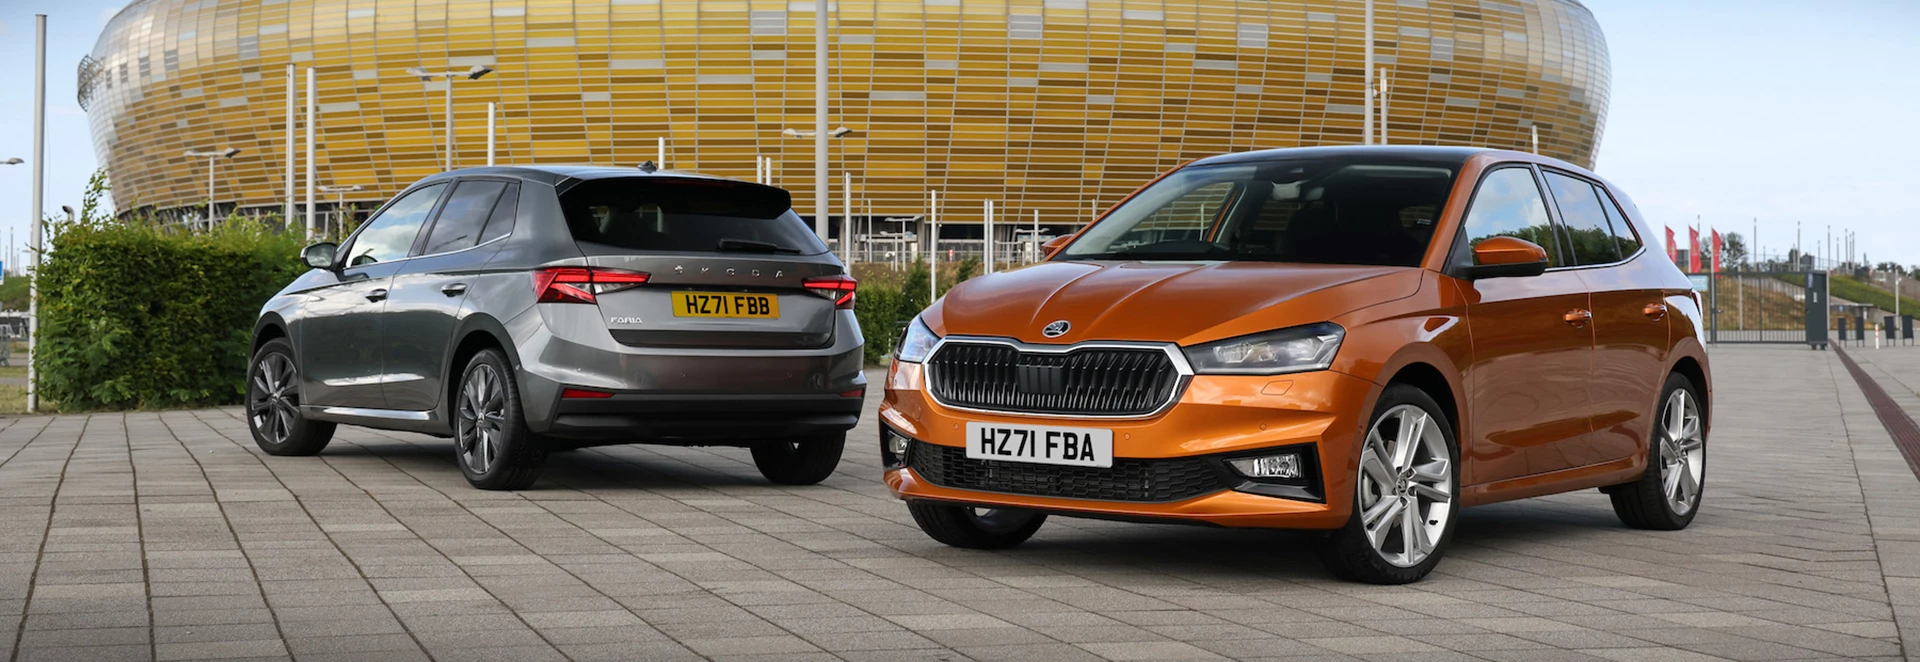 Prices announced for new Skoda Fabia 